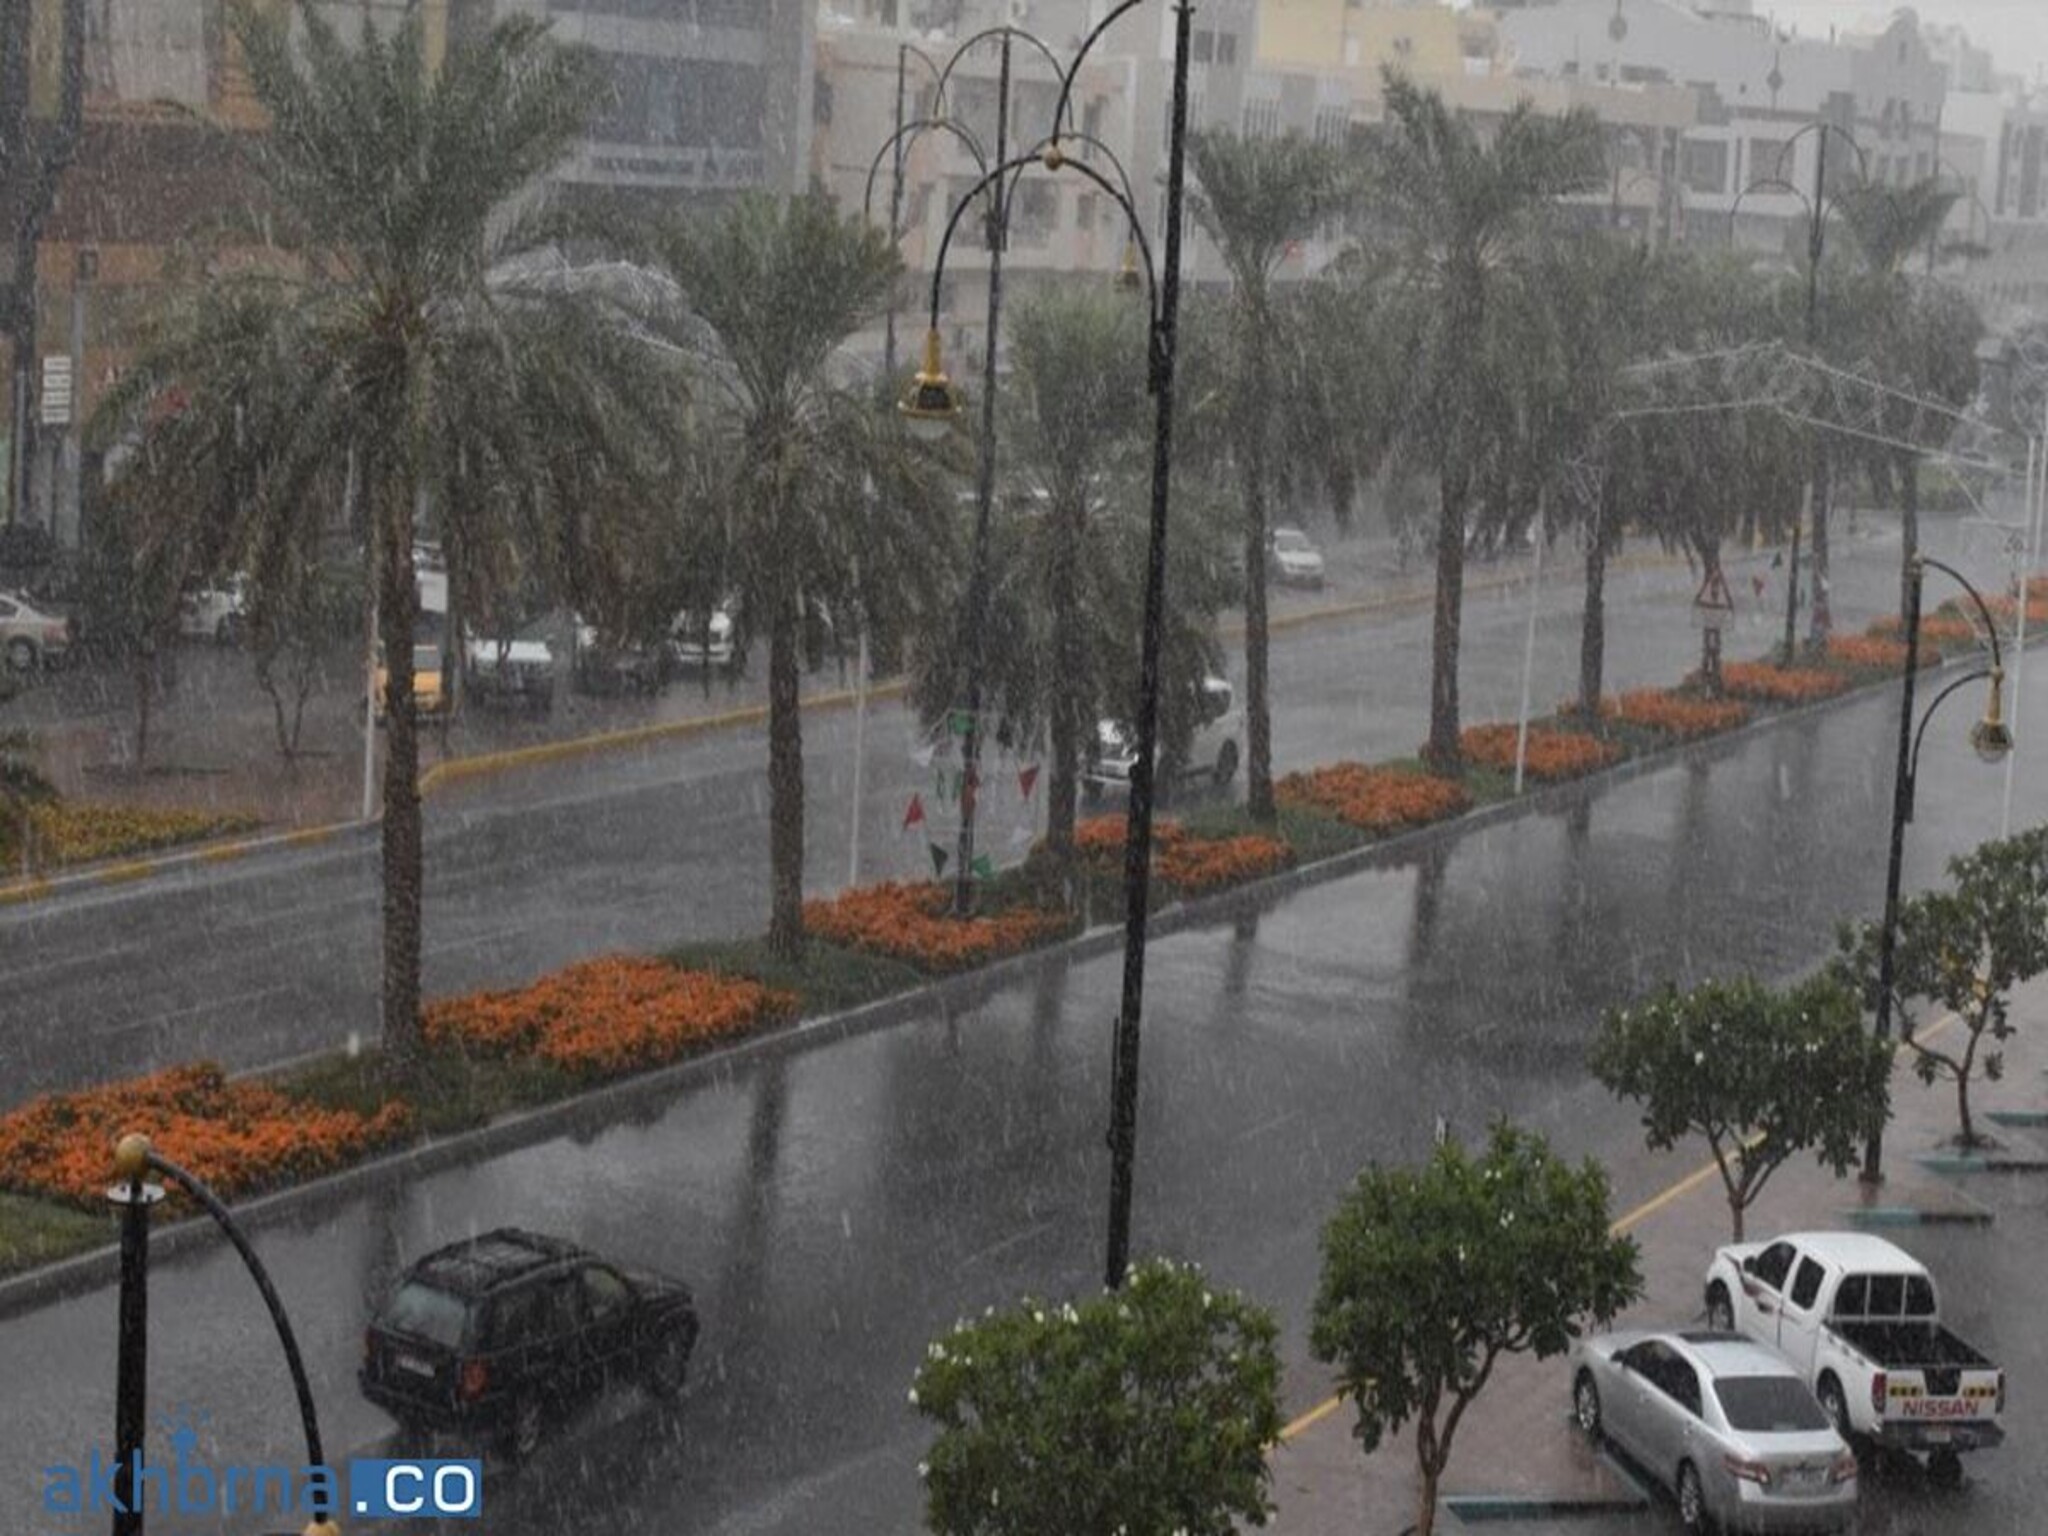 UAE Breaks Rainfall Record as the Biggest Downpour in 75 Years Sweeps Country